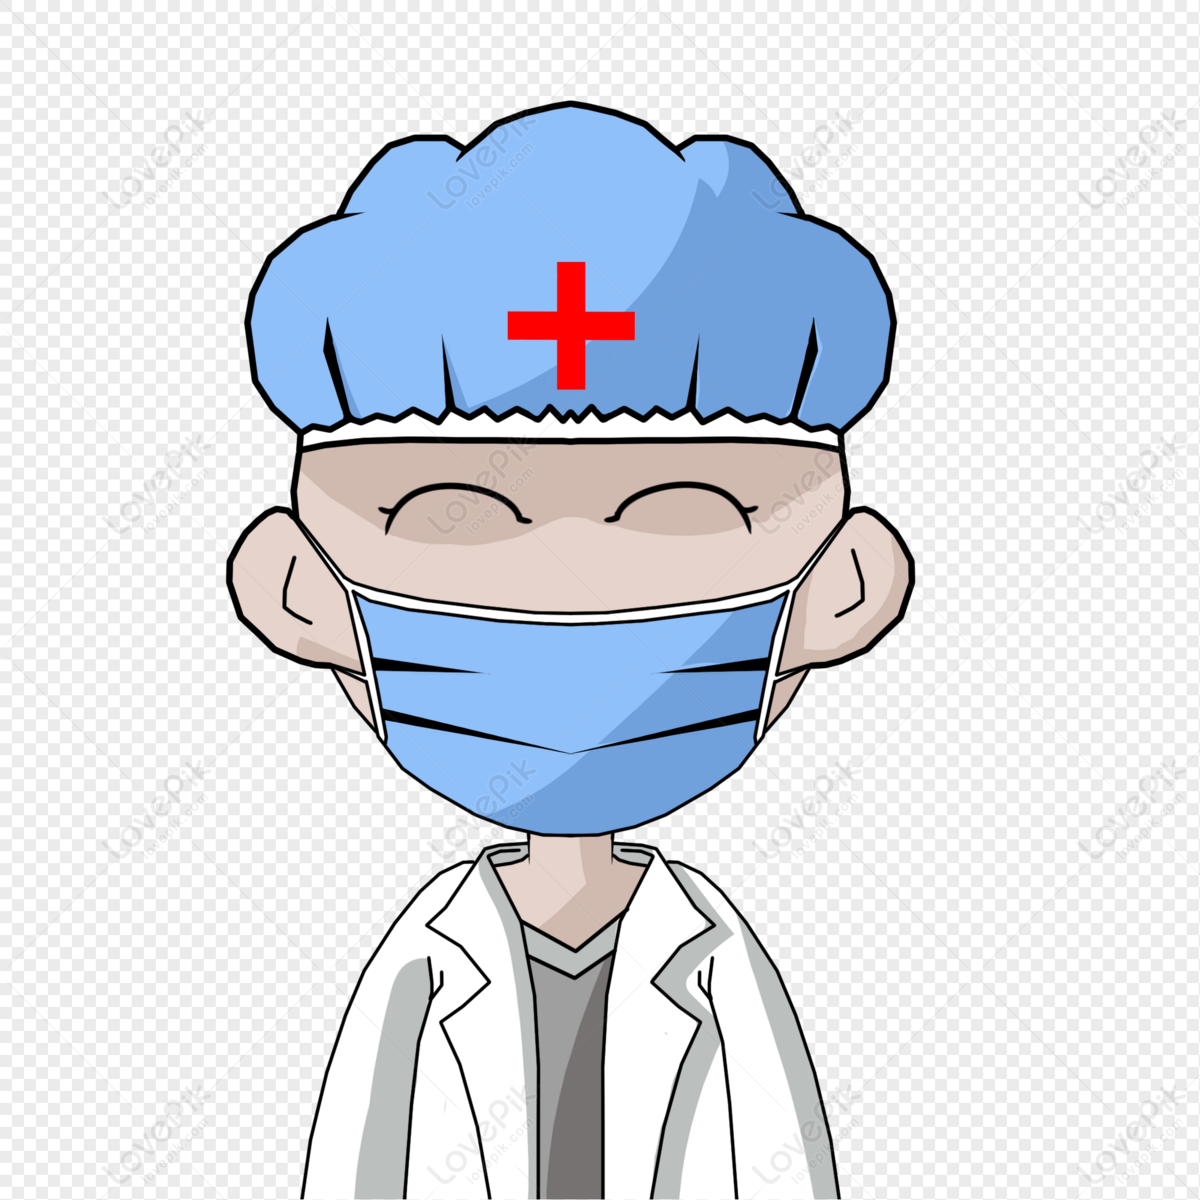 Doctor Cartoon Images, HD Pictures For Free Vectors Download 